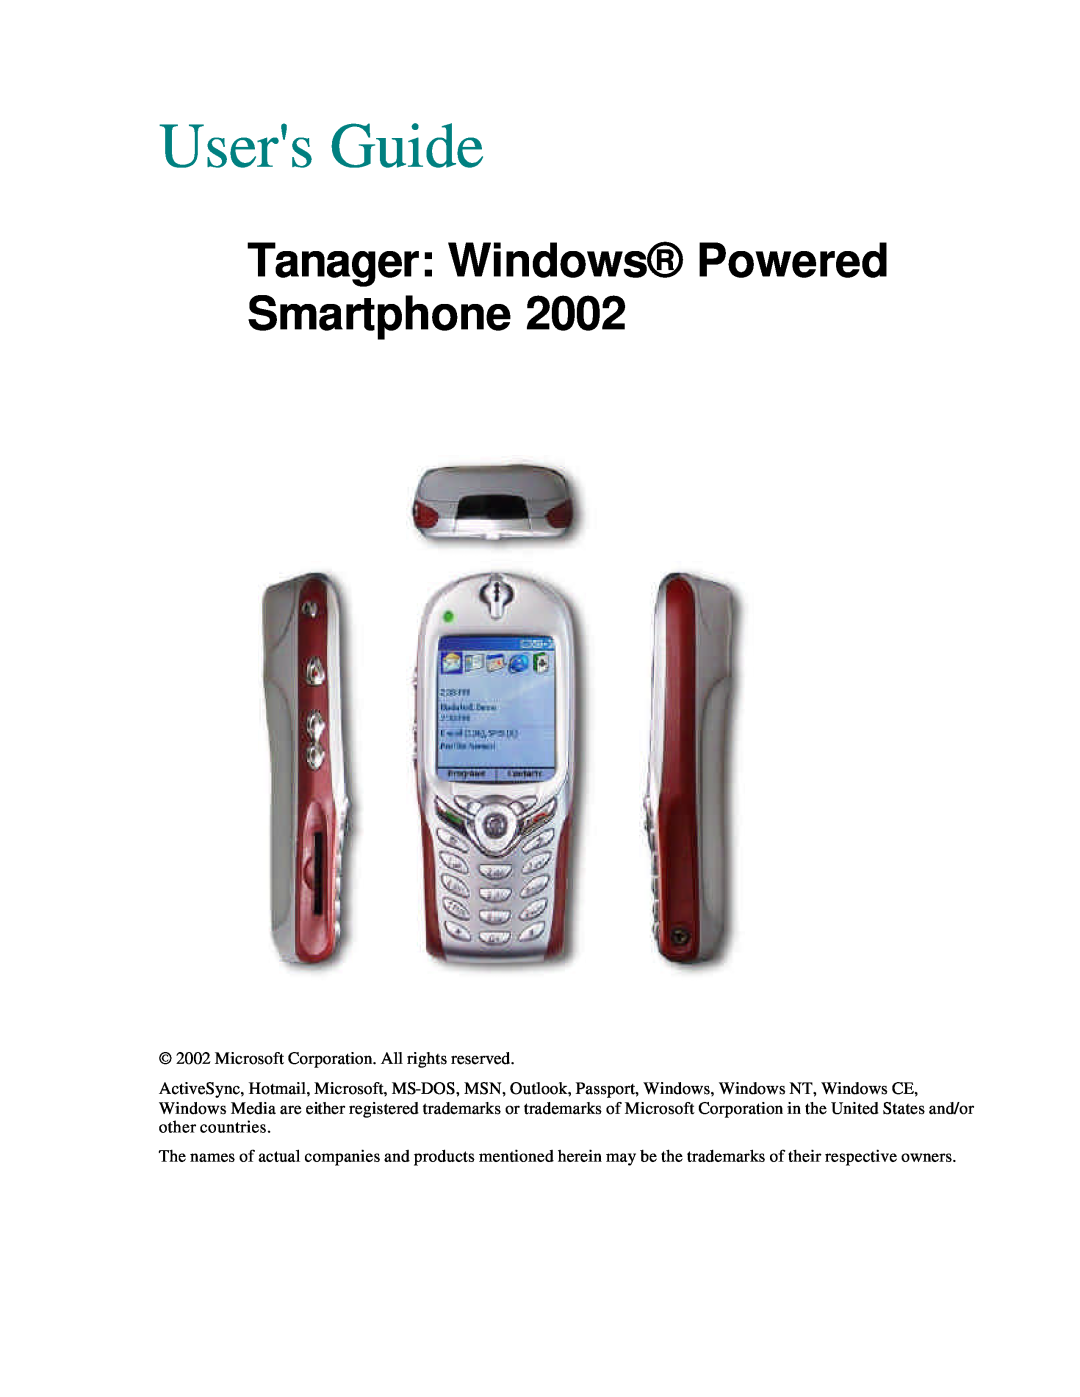 Microsoft Smartphone 2002 manual Users Guide, Tanager Windows Powered Smartphone 